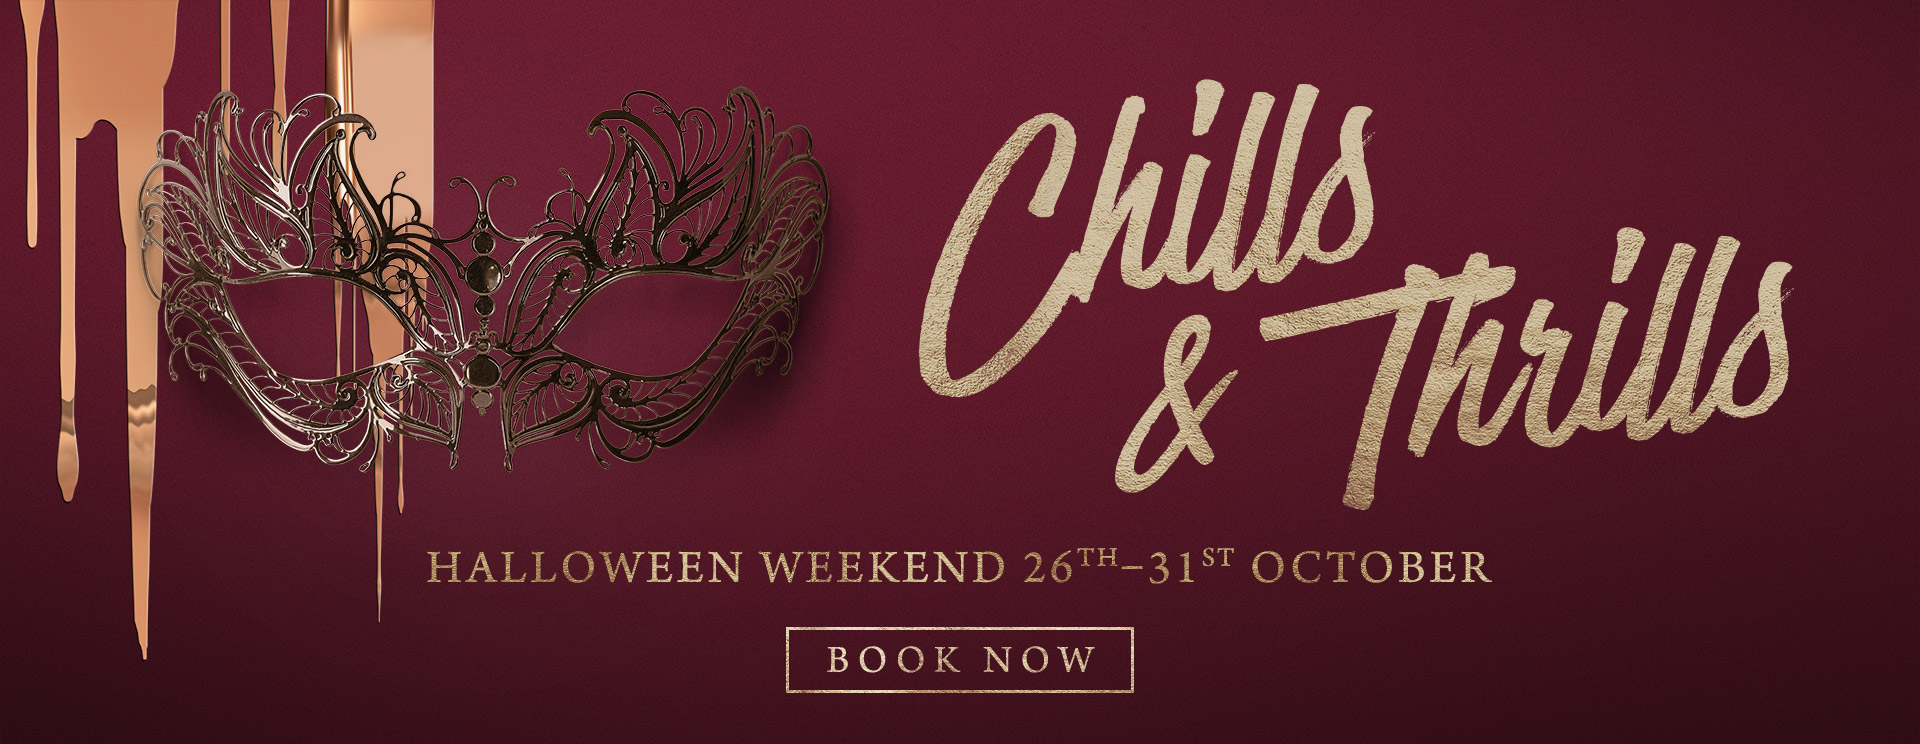 Chills & Thrills this Halloween at The Crown